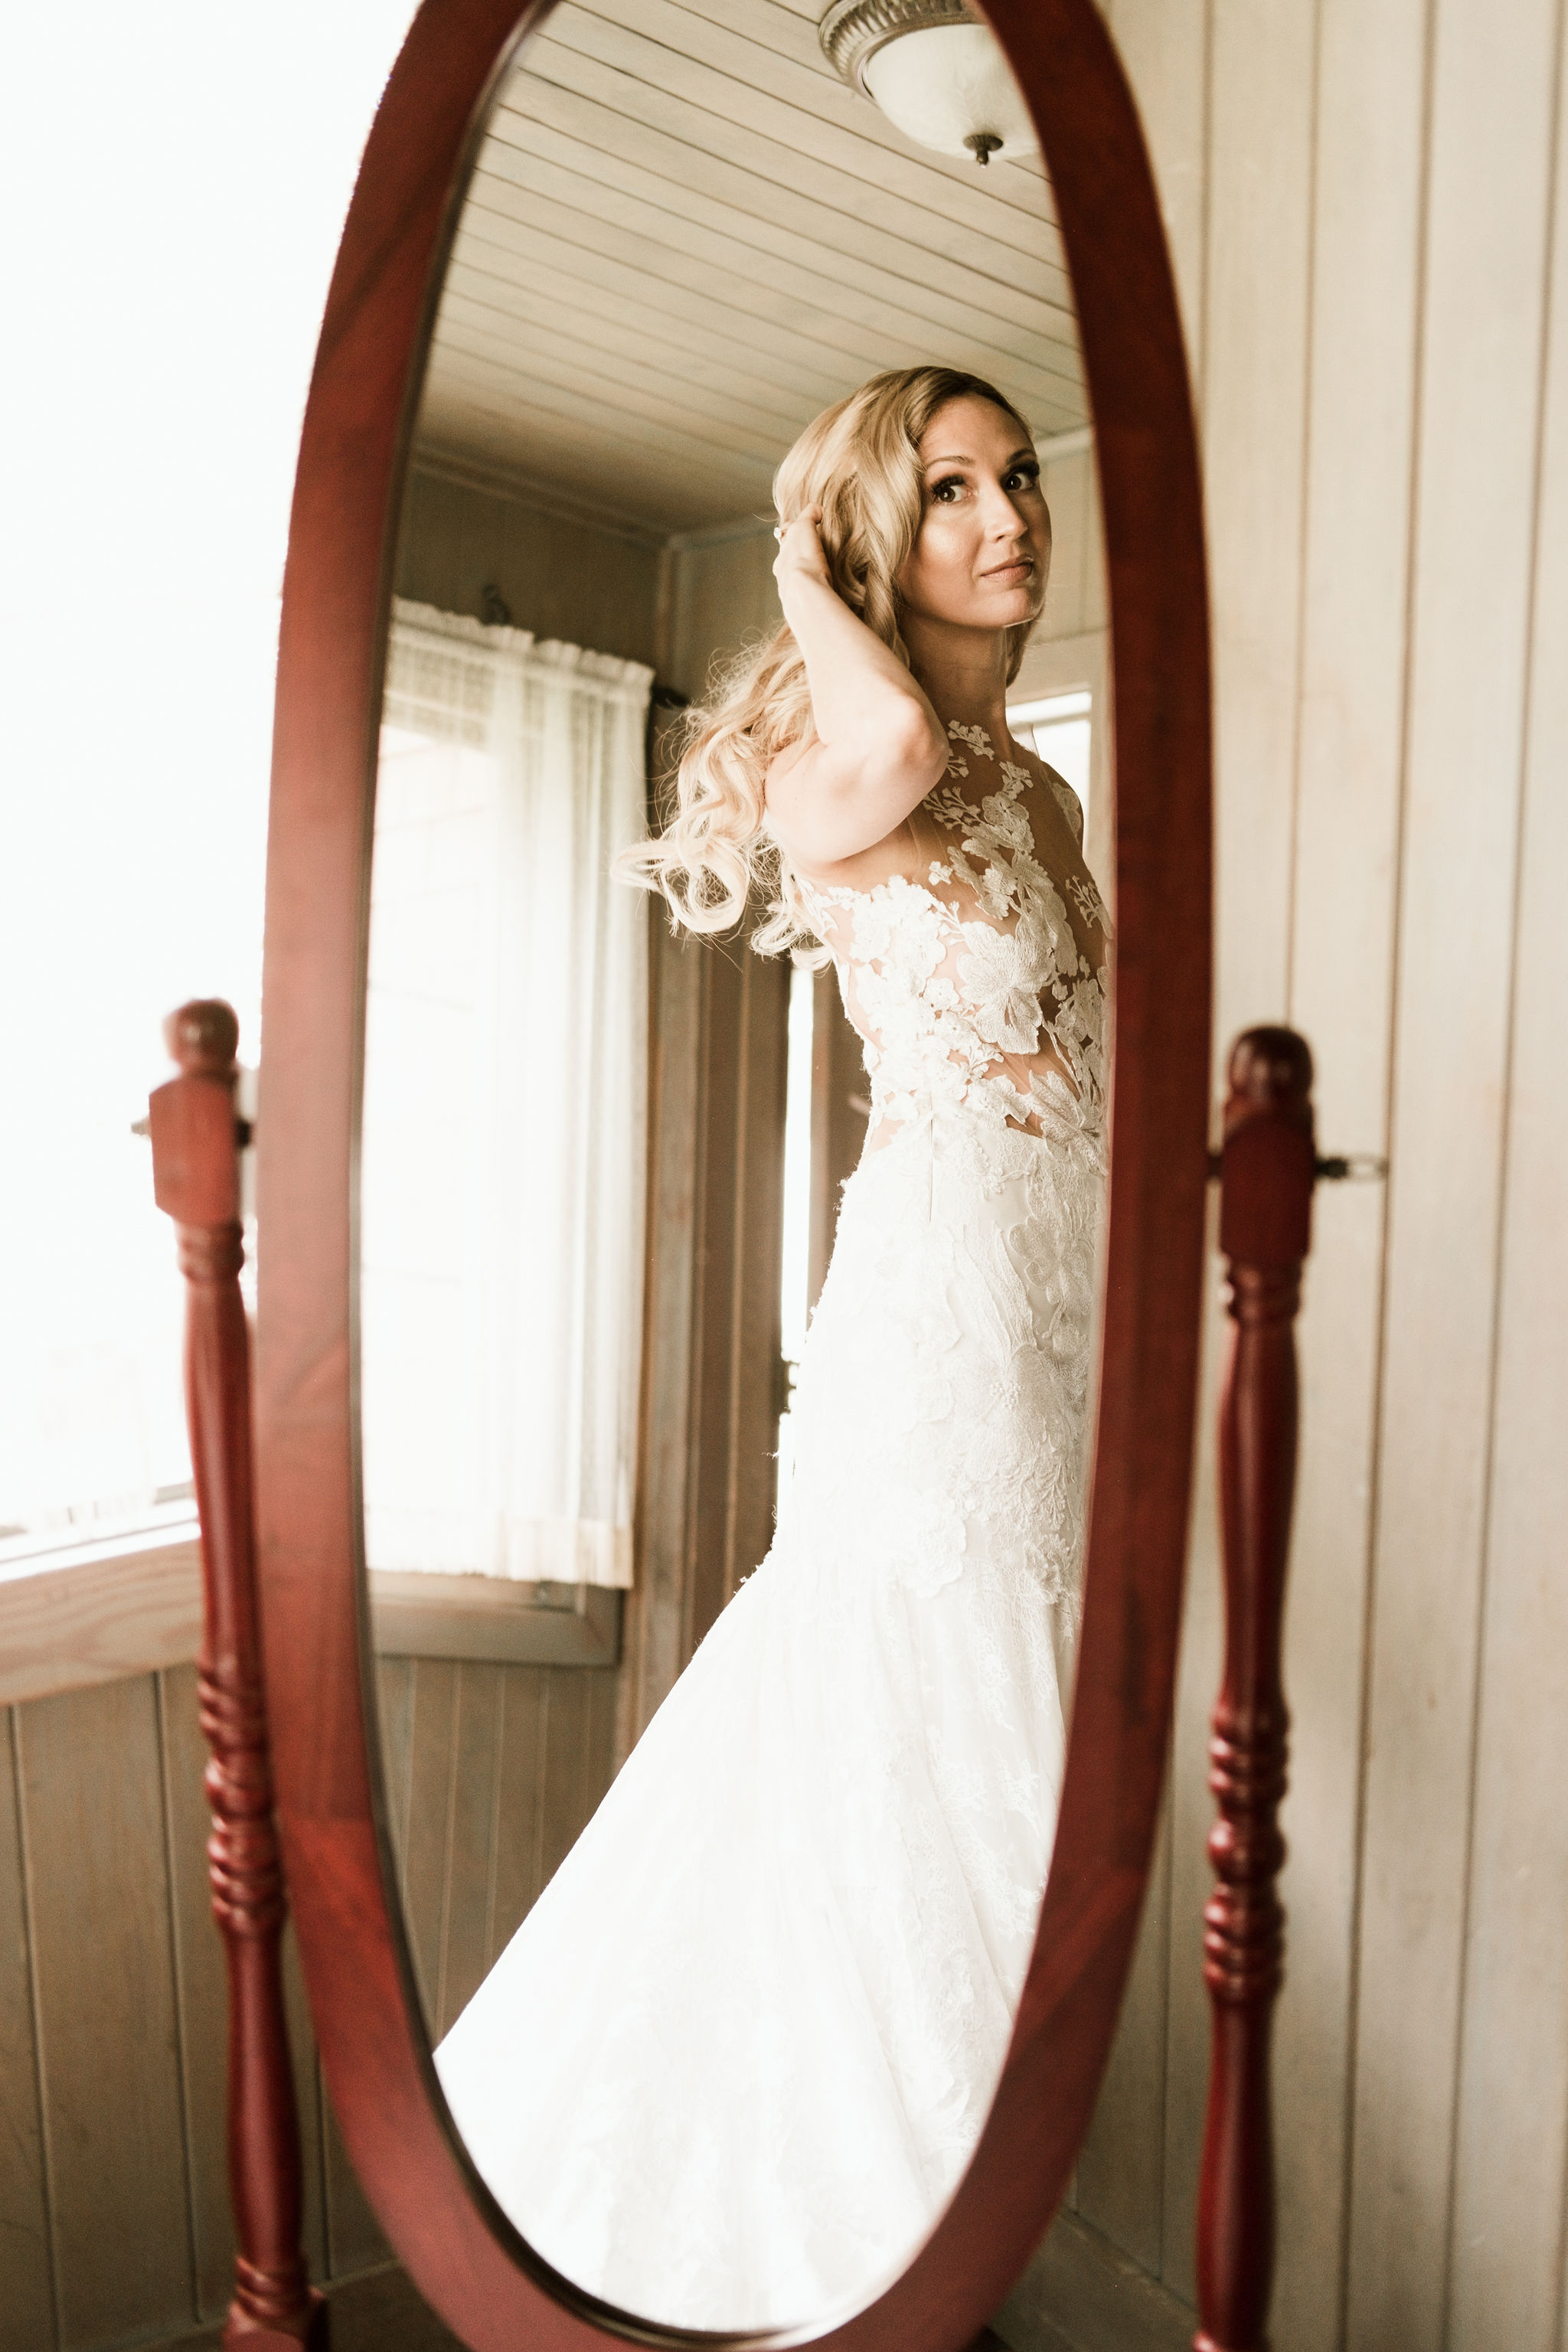 Bride looking at herself in the mirror